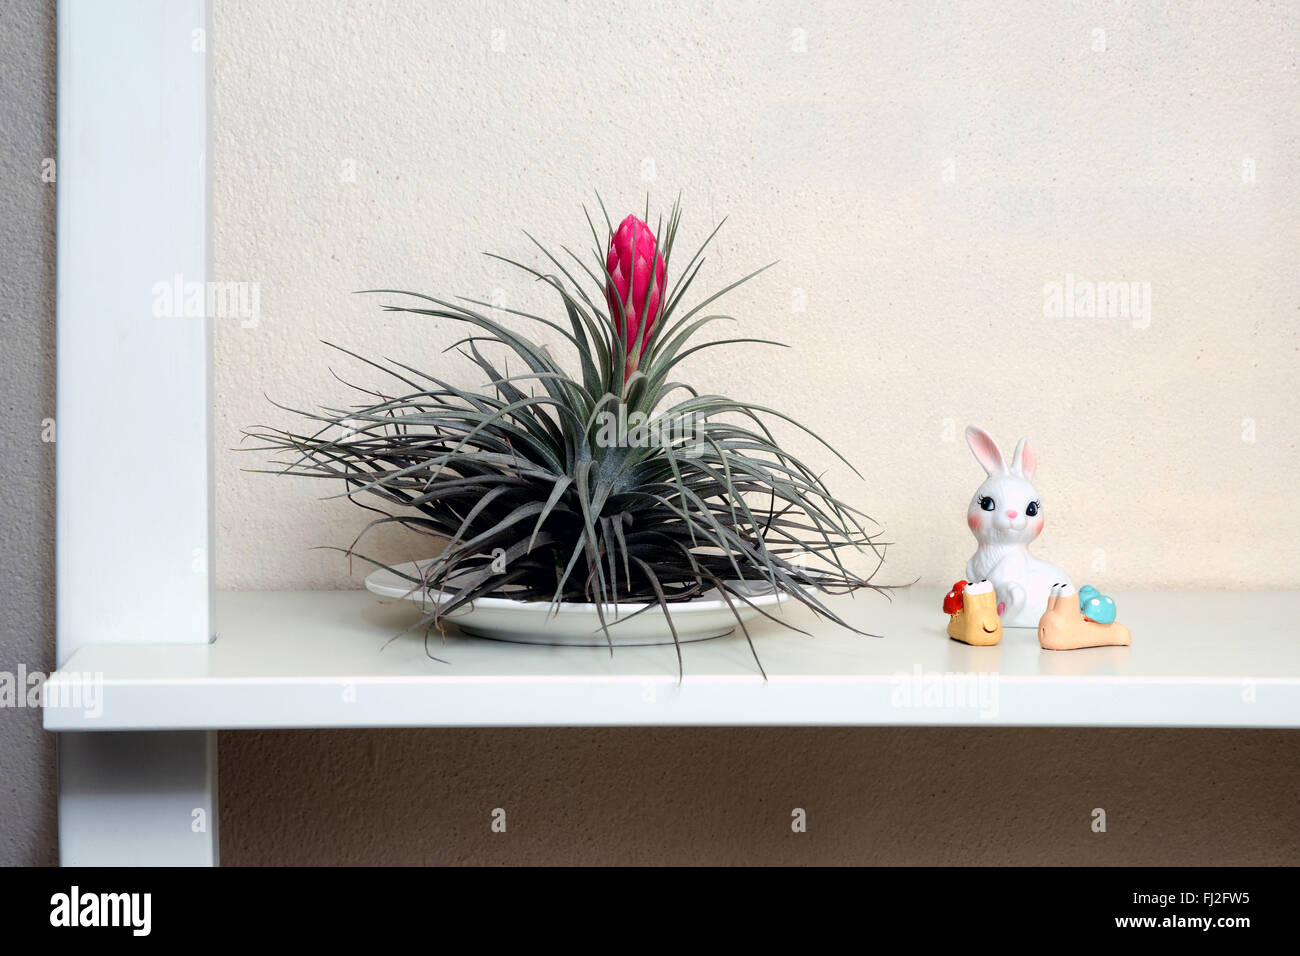 Simple decor on white shelf by tillandsia make home closer to nature. Stock Photo